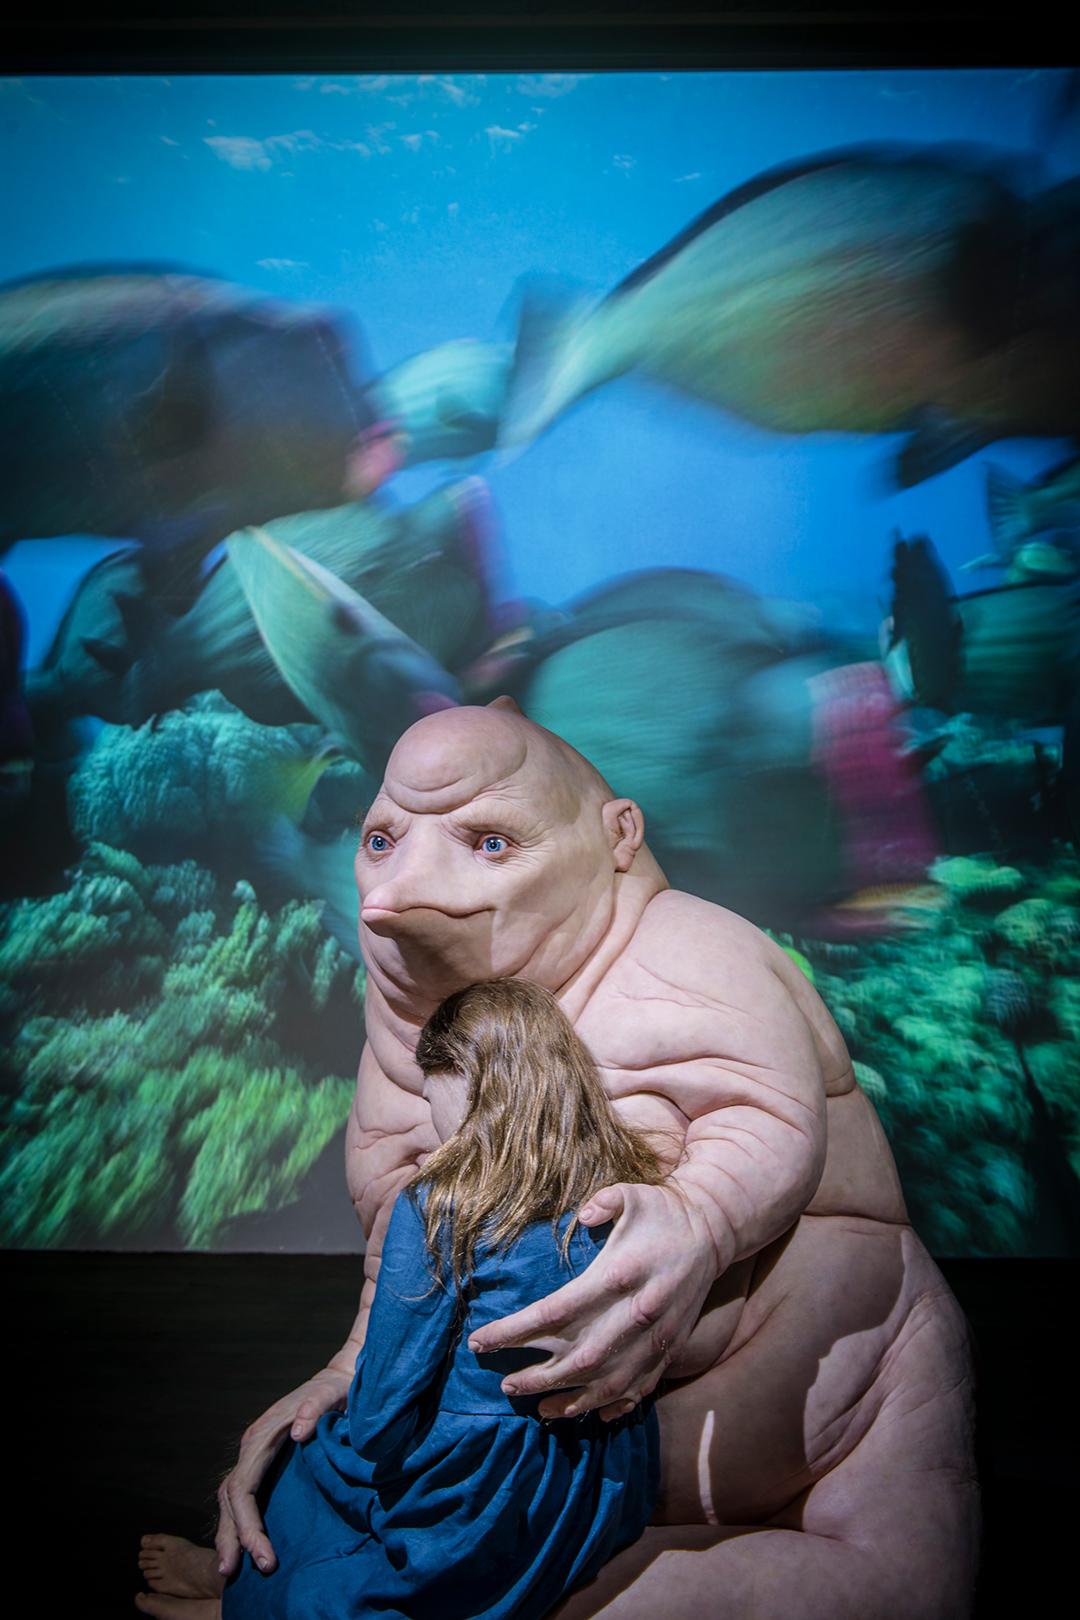 No Fear of Depths by Patricia Piccinini. Photo credit: Eugene Hyland